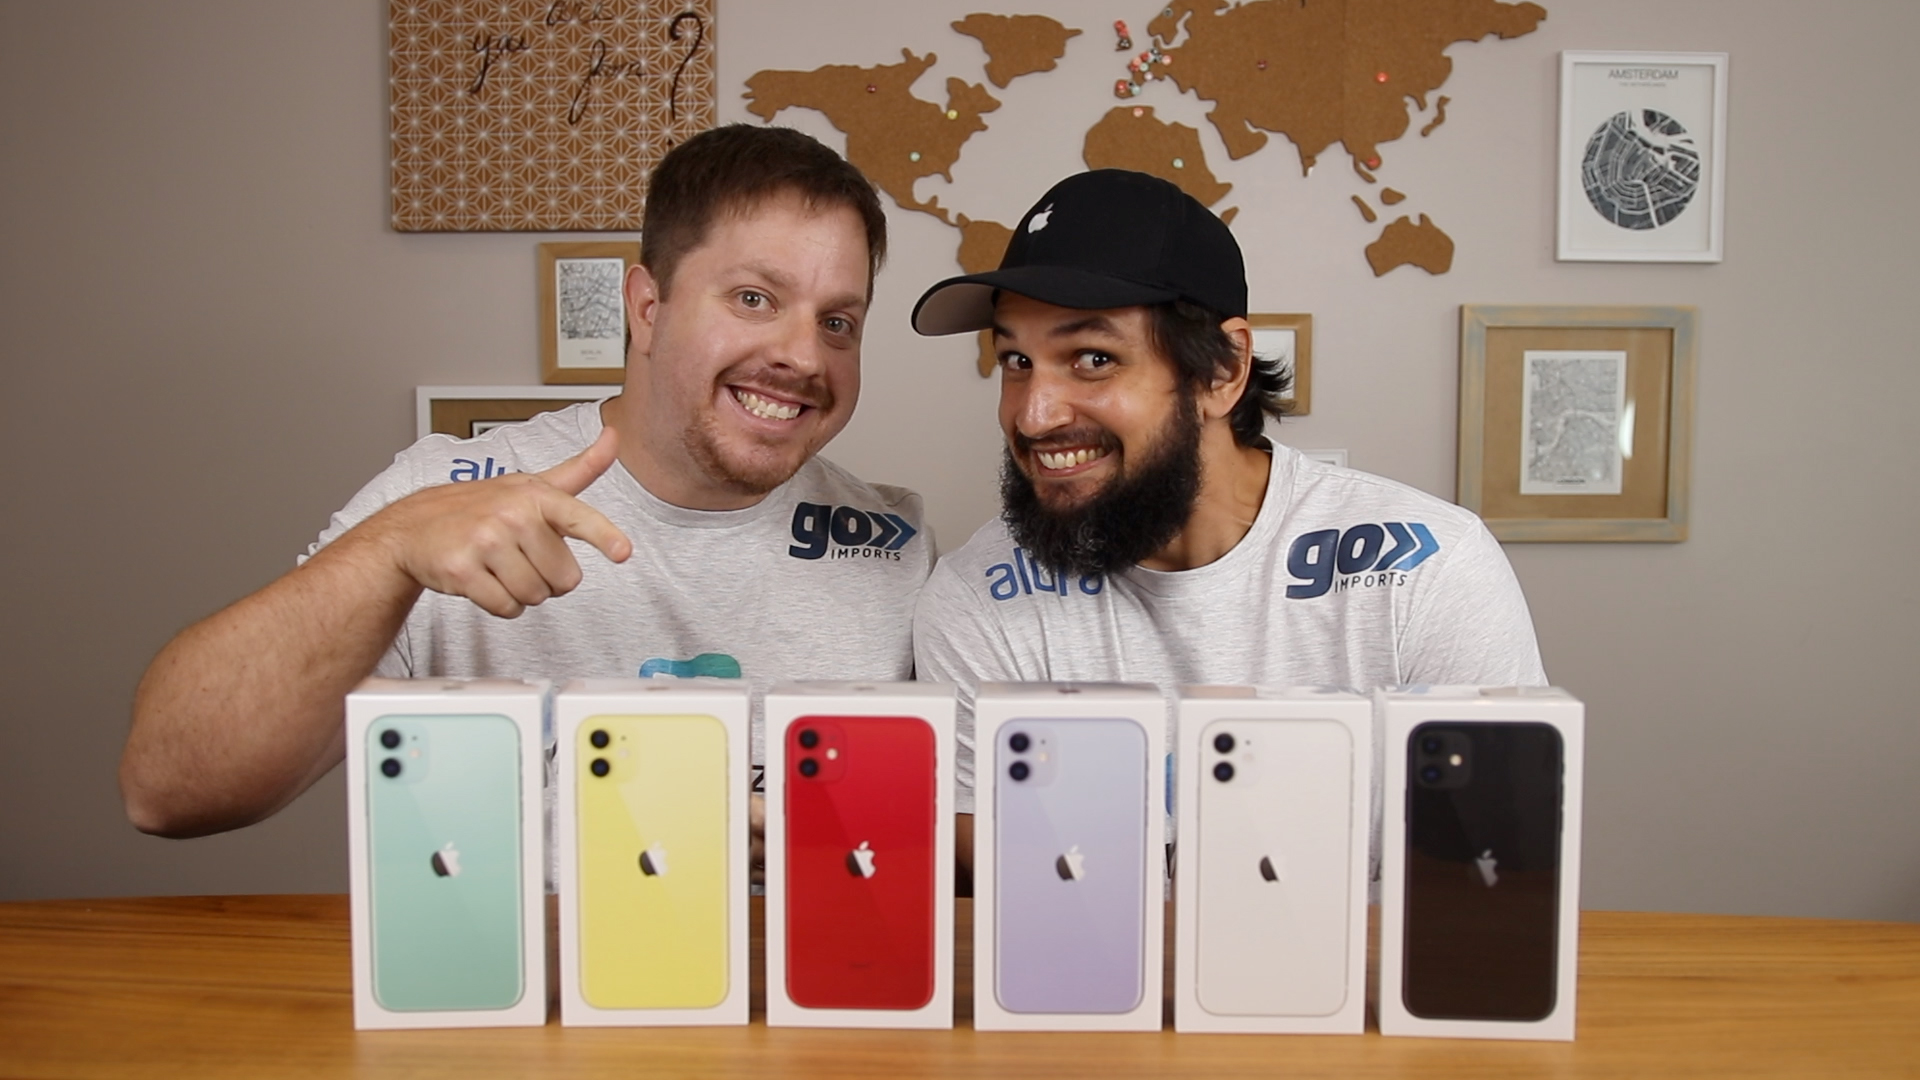 Video: Unboxing of all iPhones 11!